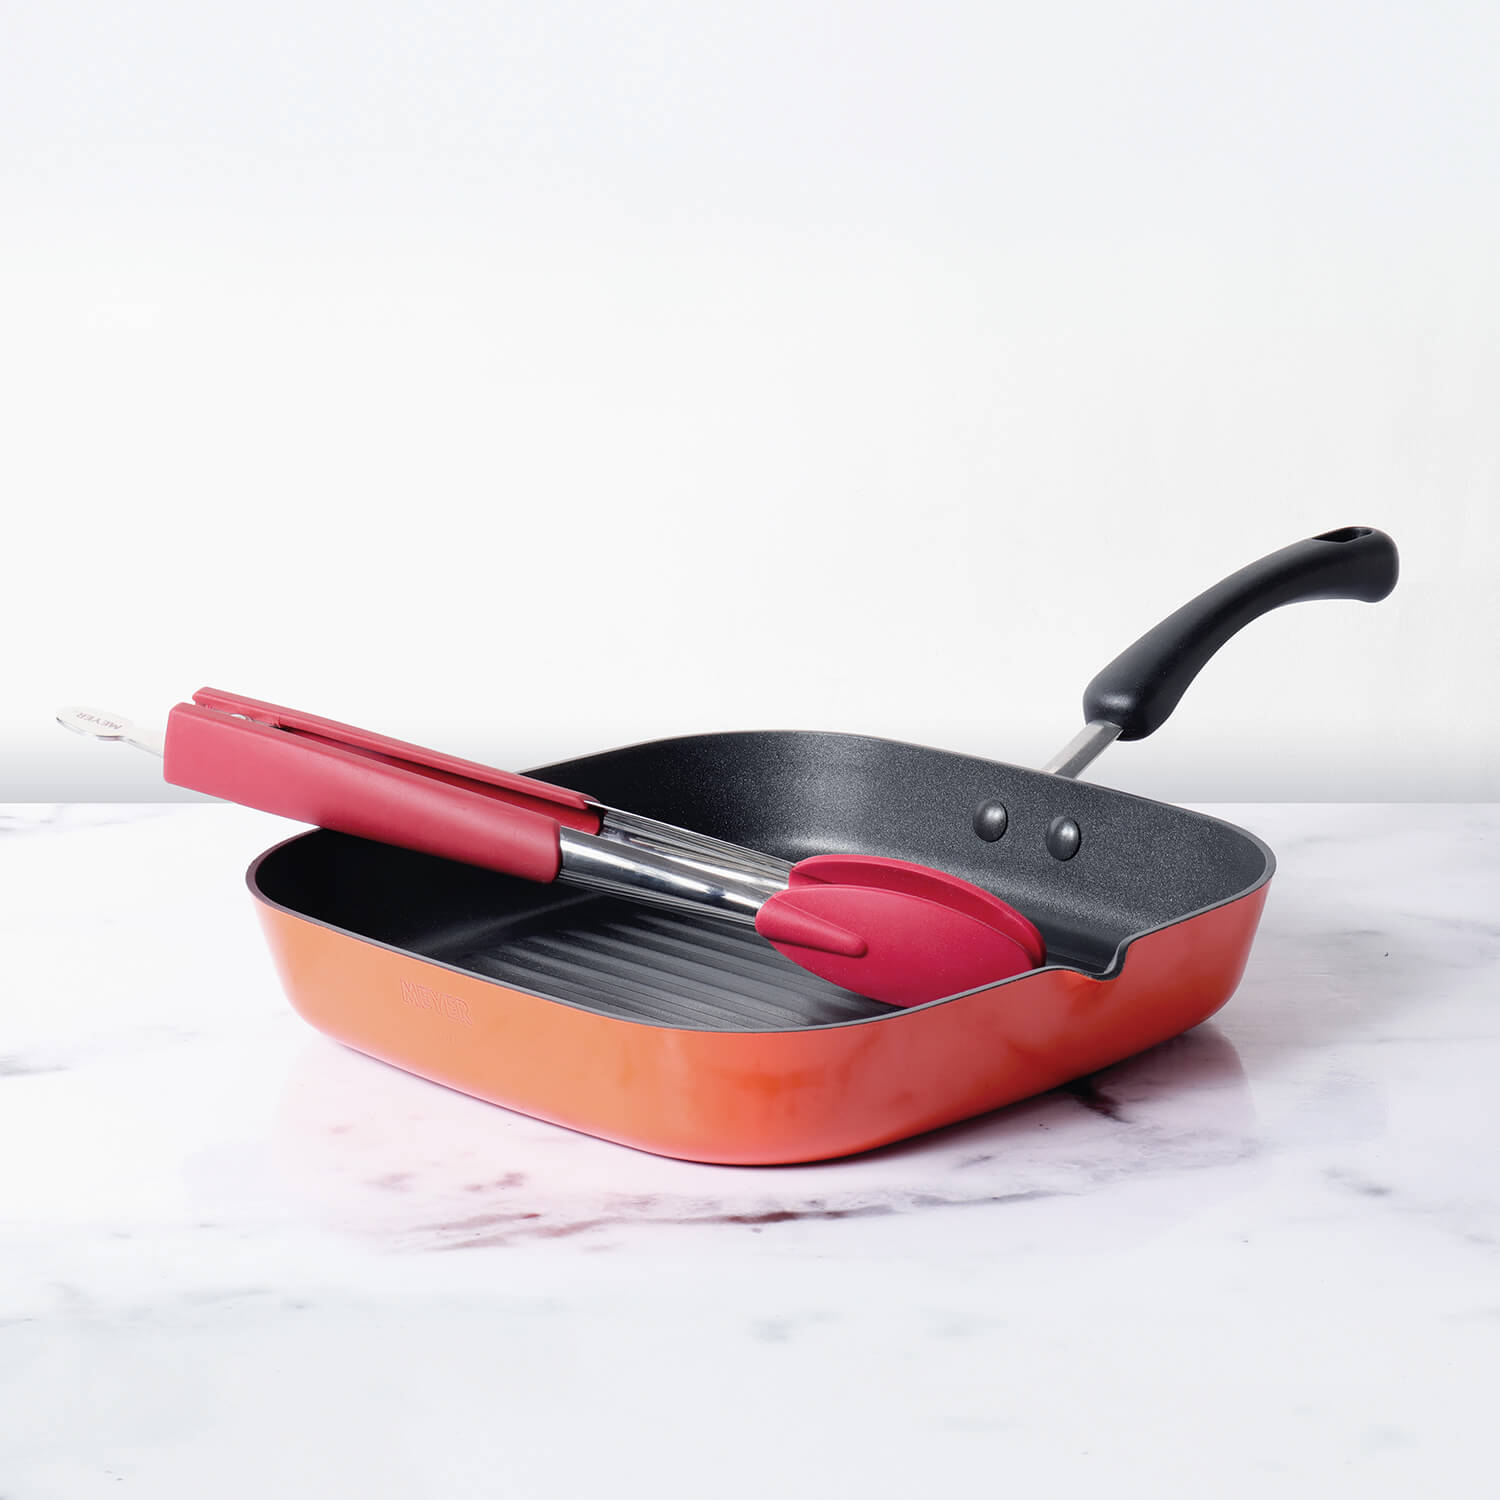 Meyer 2-Piece Set - Grillpan 28cm + 12" Silicone Tongs - Pots and Pans